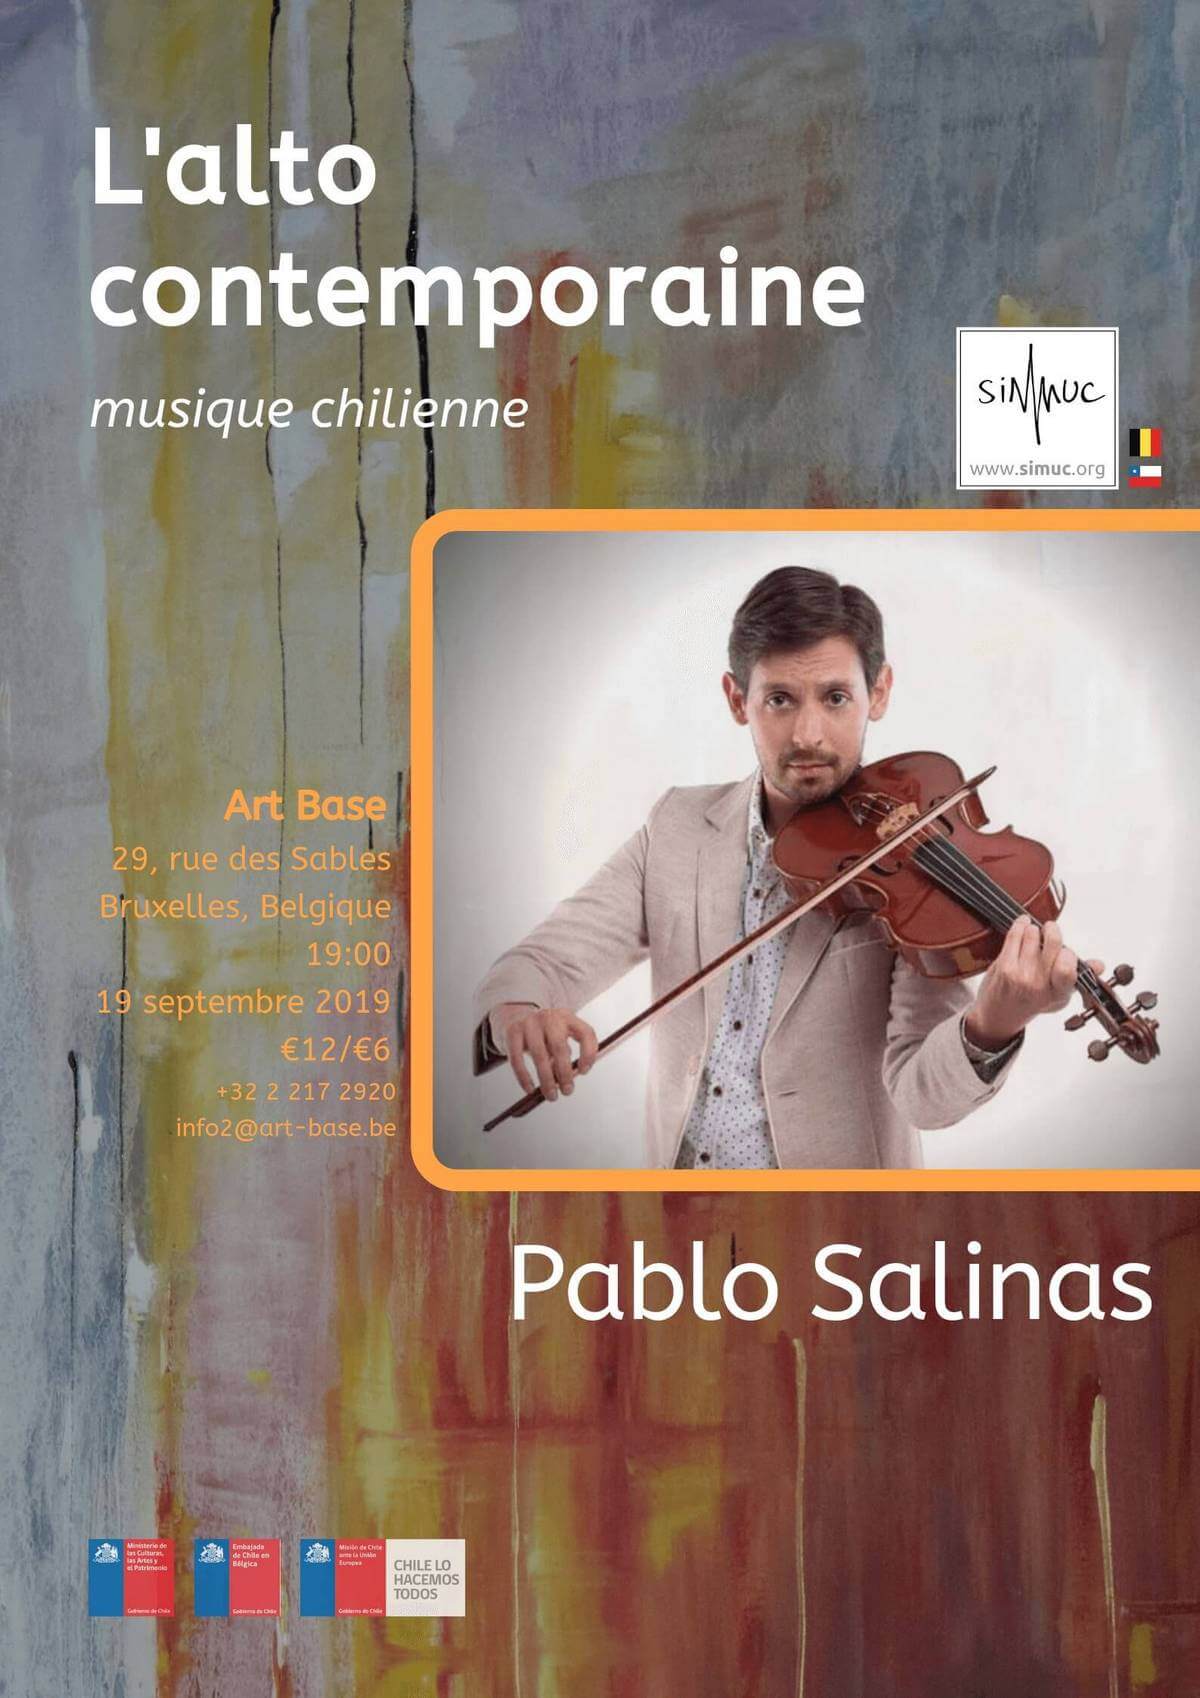 Contemporary Viola. Chilean Music in Brussels.